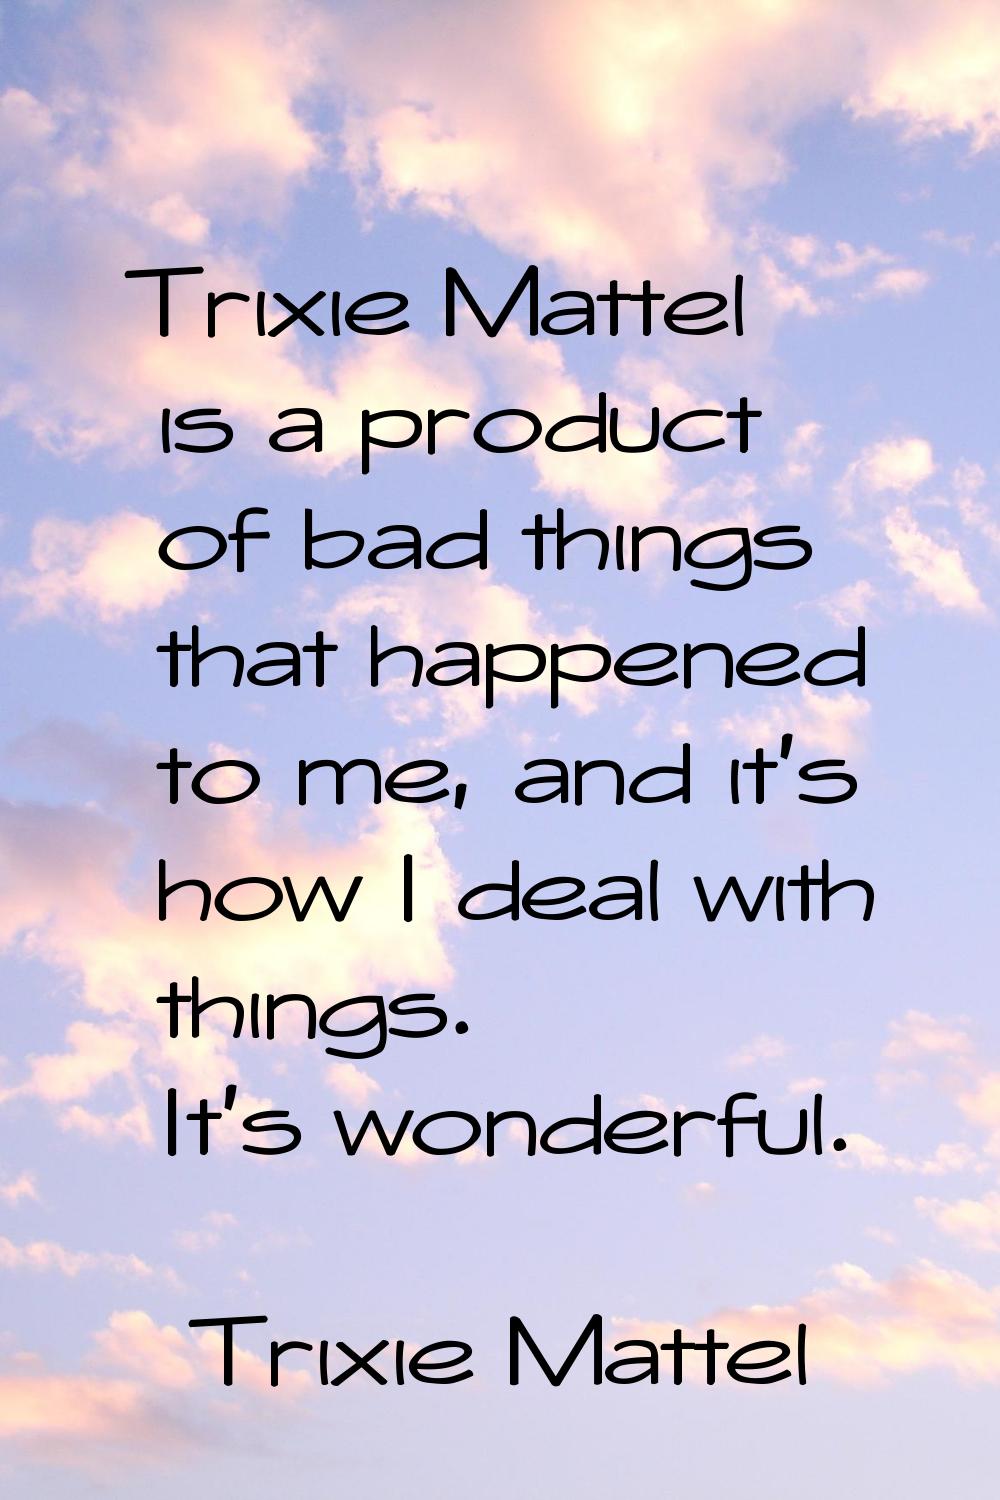 Trixie Mattel is a product of bad things that happened to me, and it's how I deal with things. It's